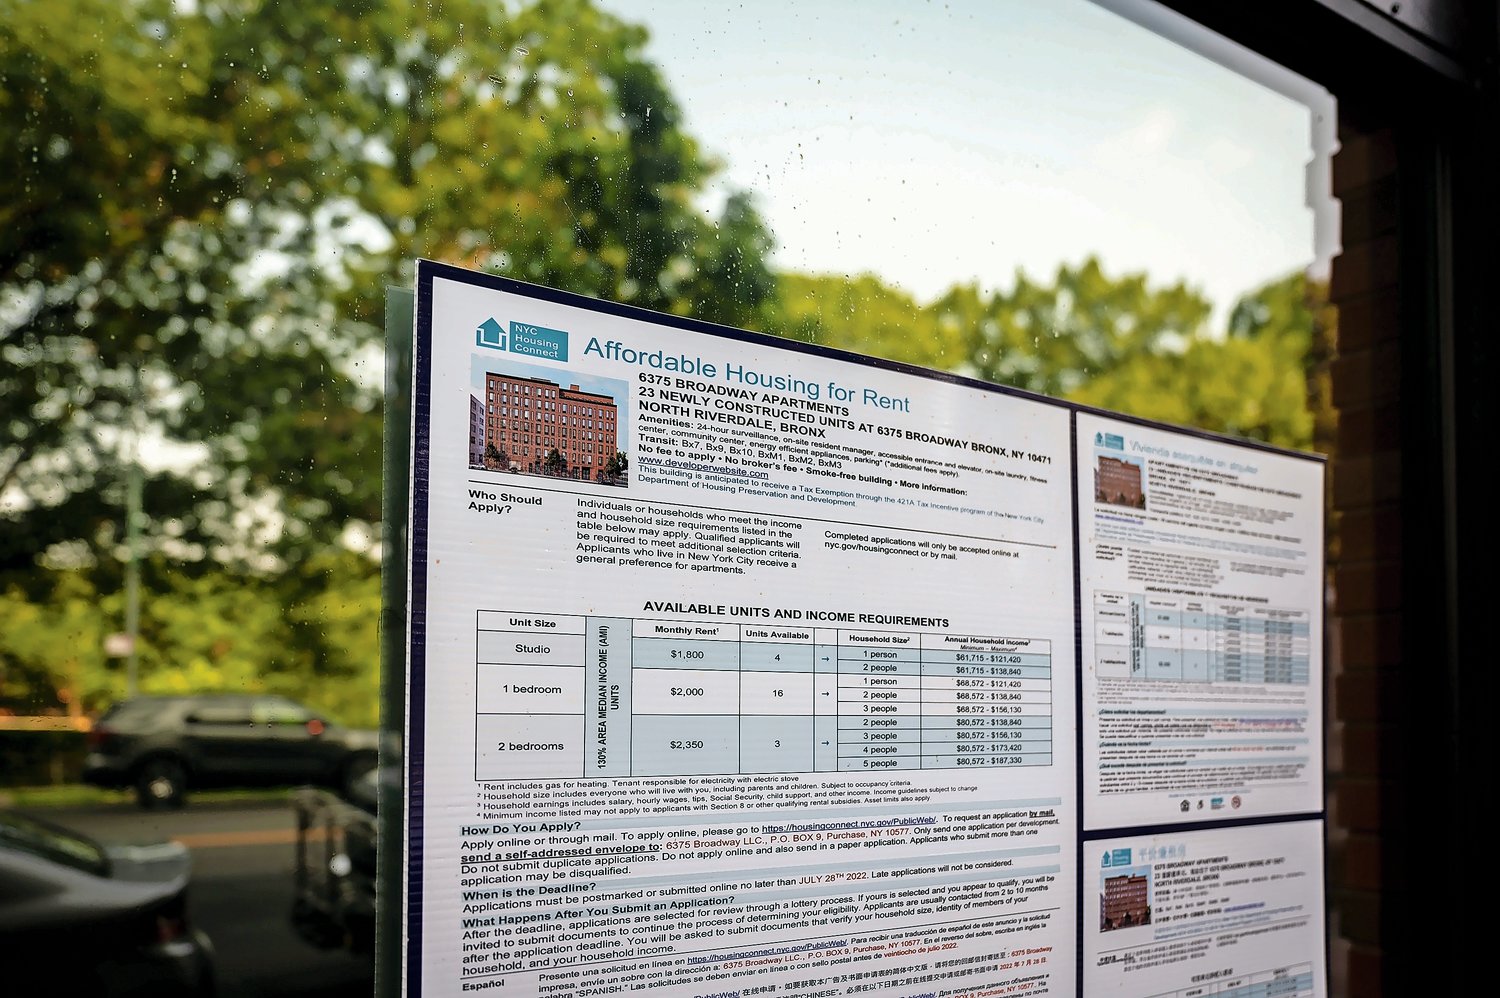 The income requirements breakdown on a board near the main entrance of 6327 Broadway on Wednesday, July 20, 2022.